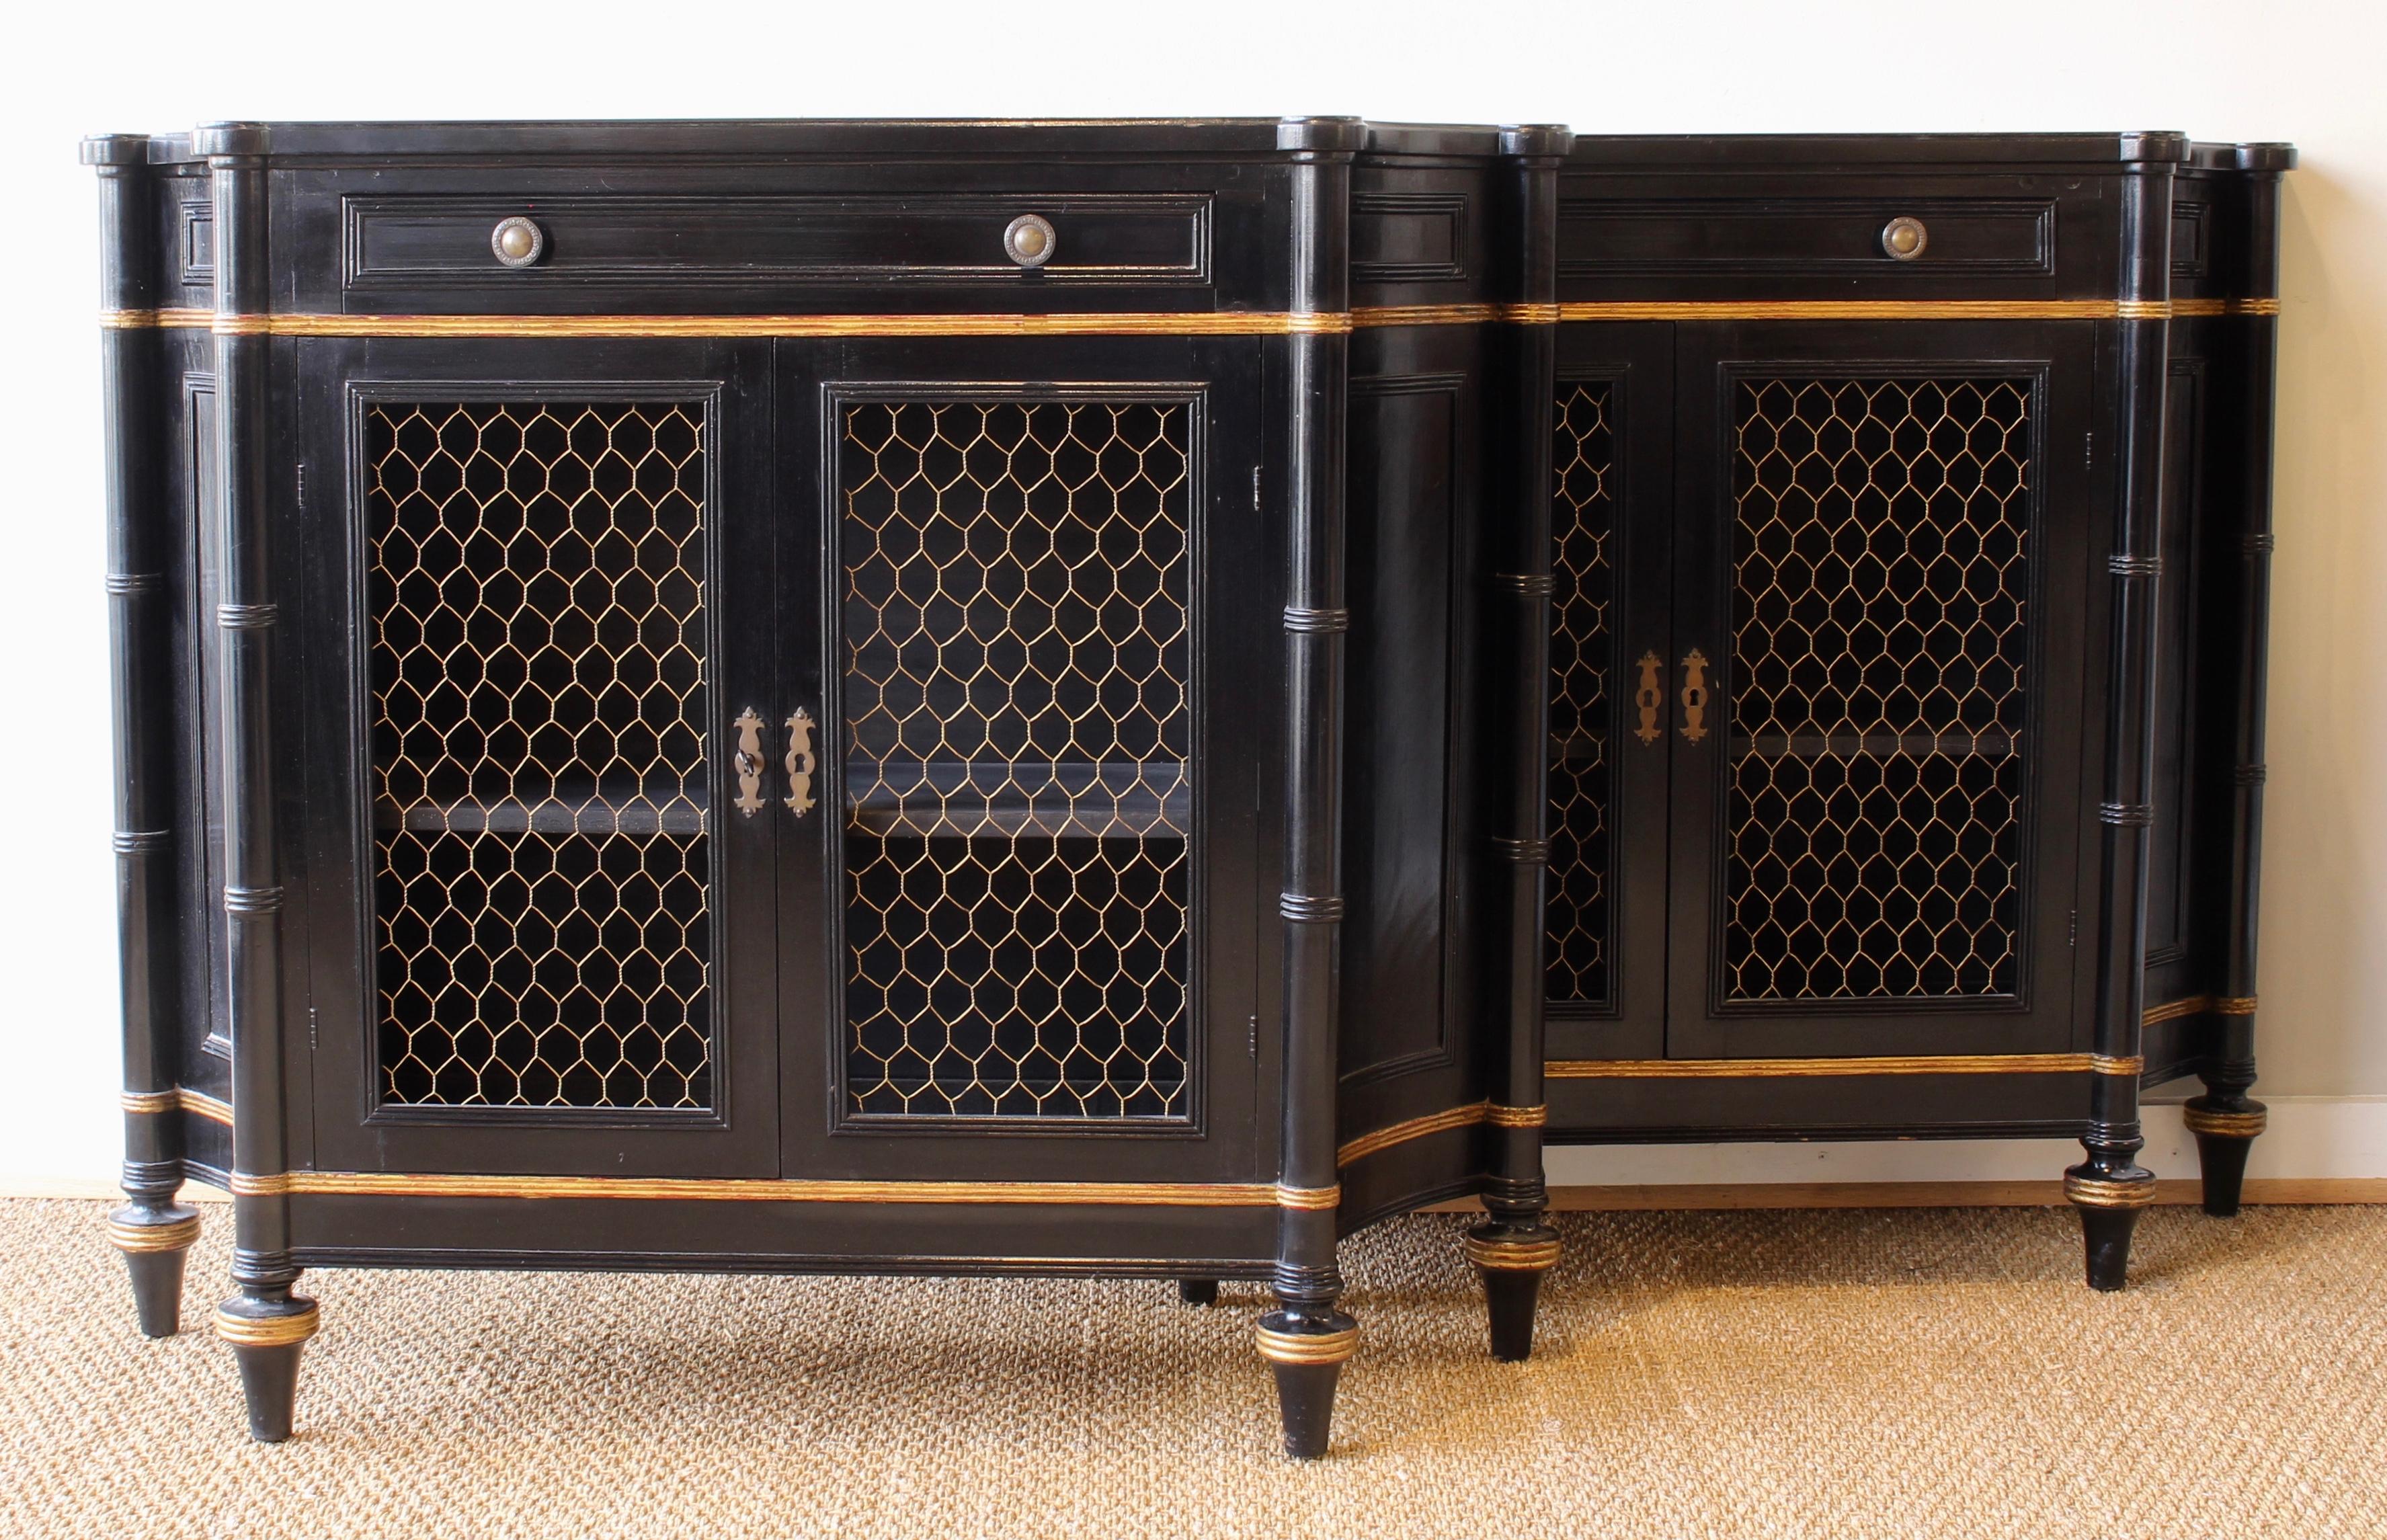 A charming pair of mid-20th century ebonized Regency style credenzas each with a single drawer above double cabinet doors inset with brass grillwork